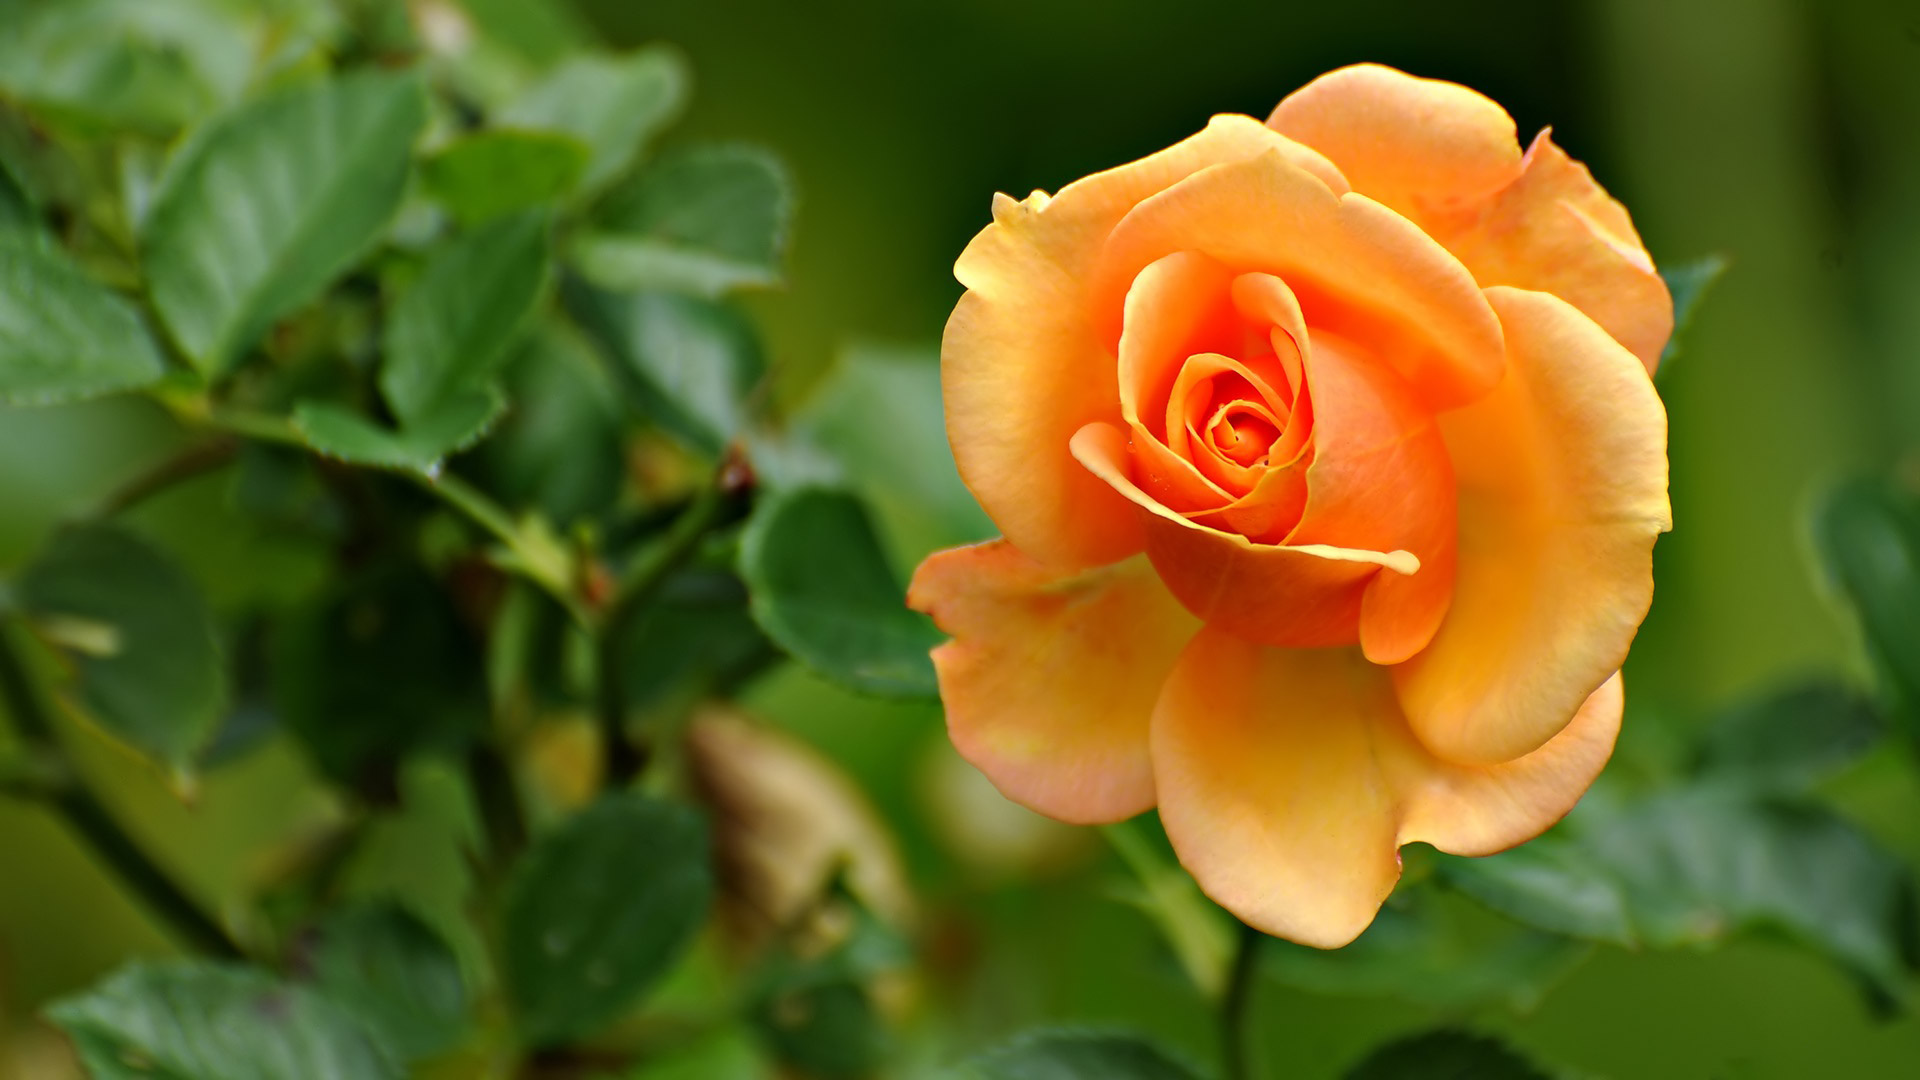 Orange Rose Pleasing Marvelous Natural Beauty Is Shown By This